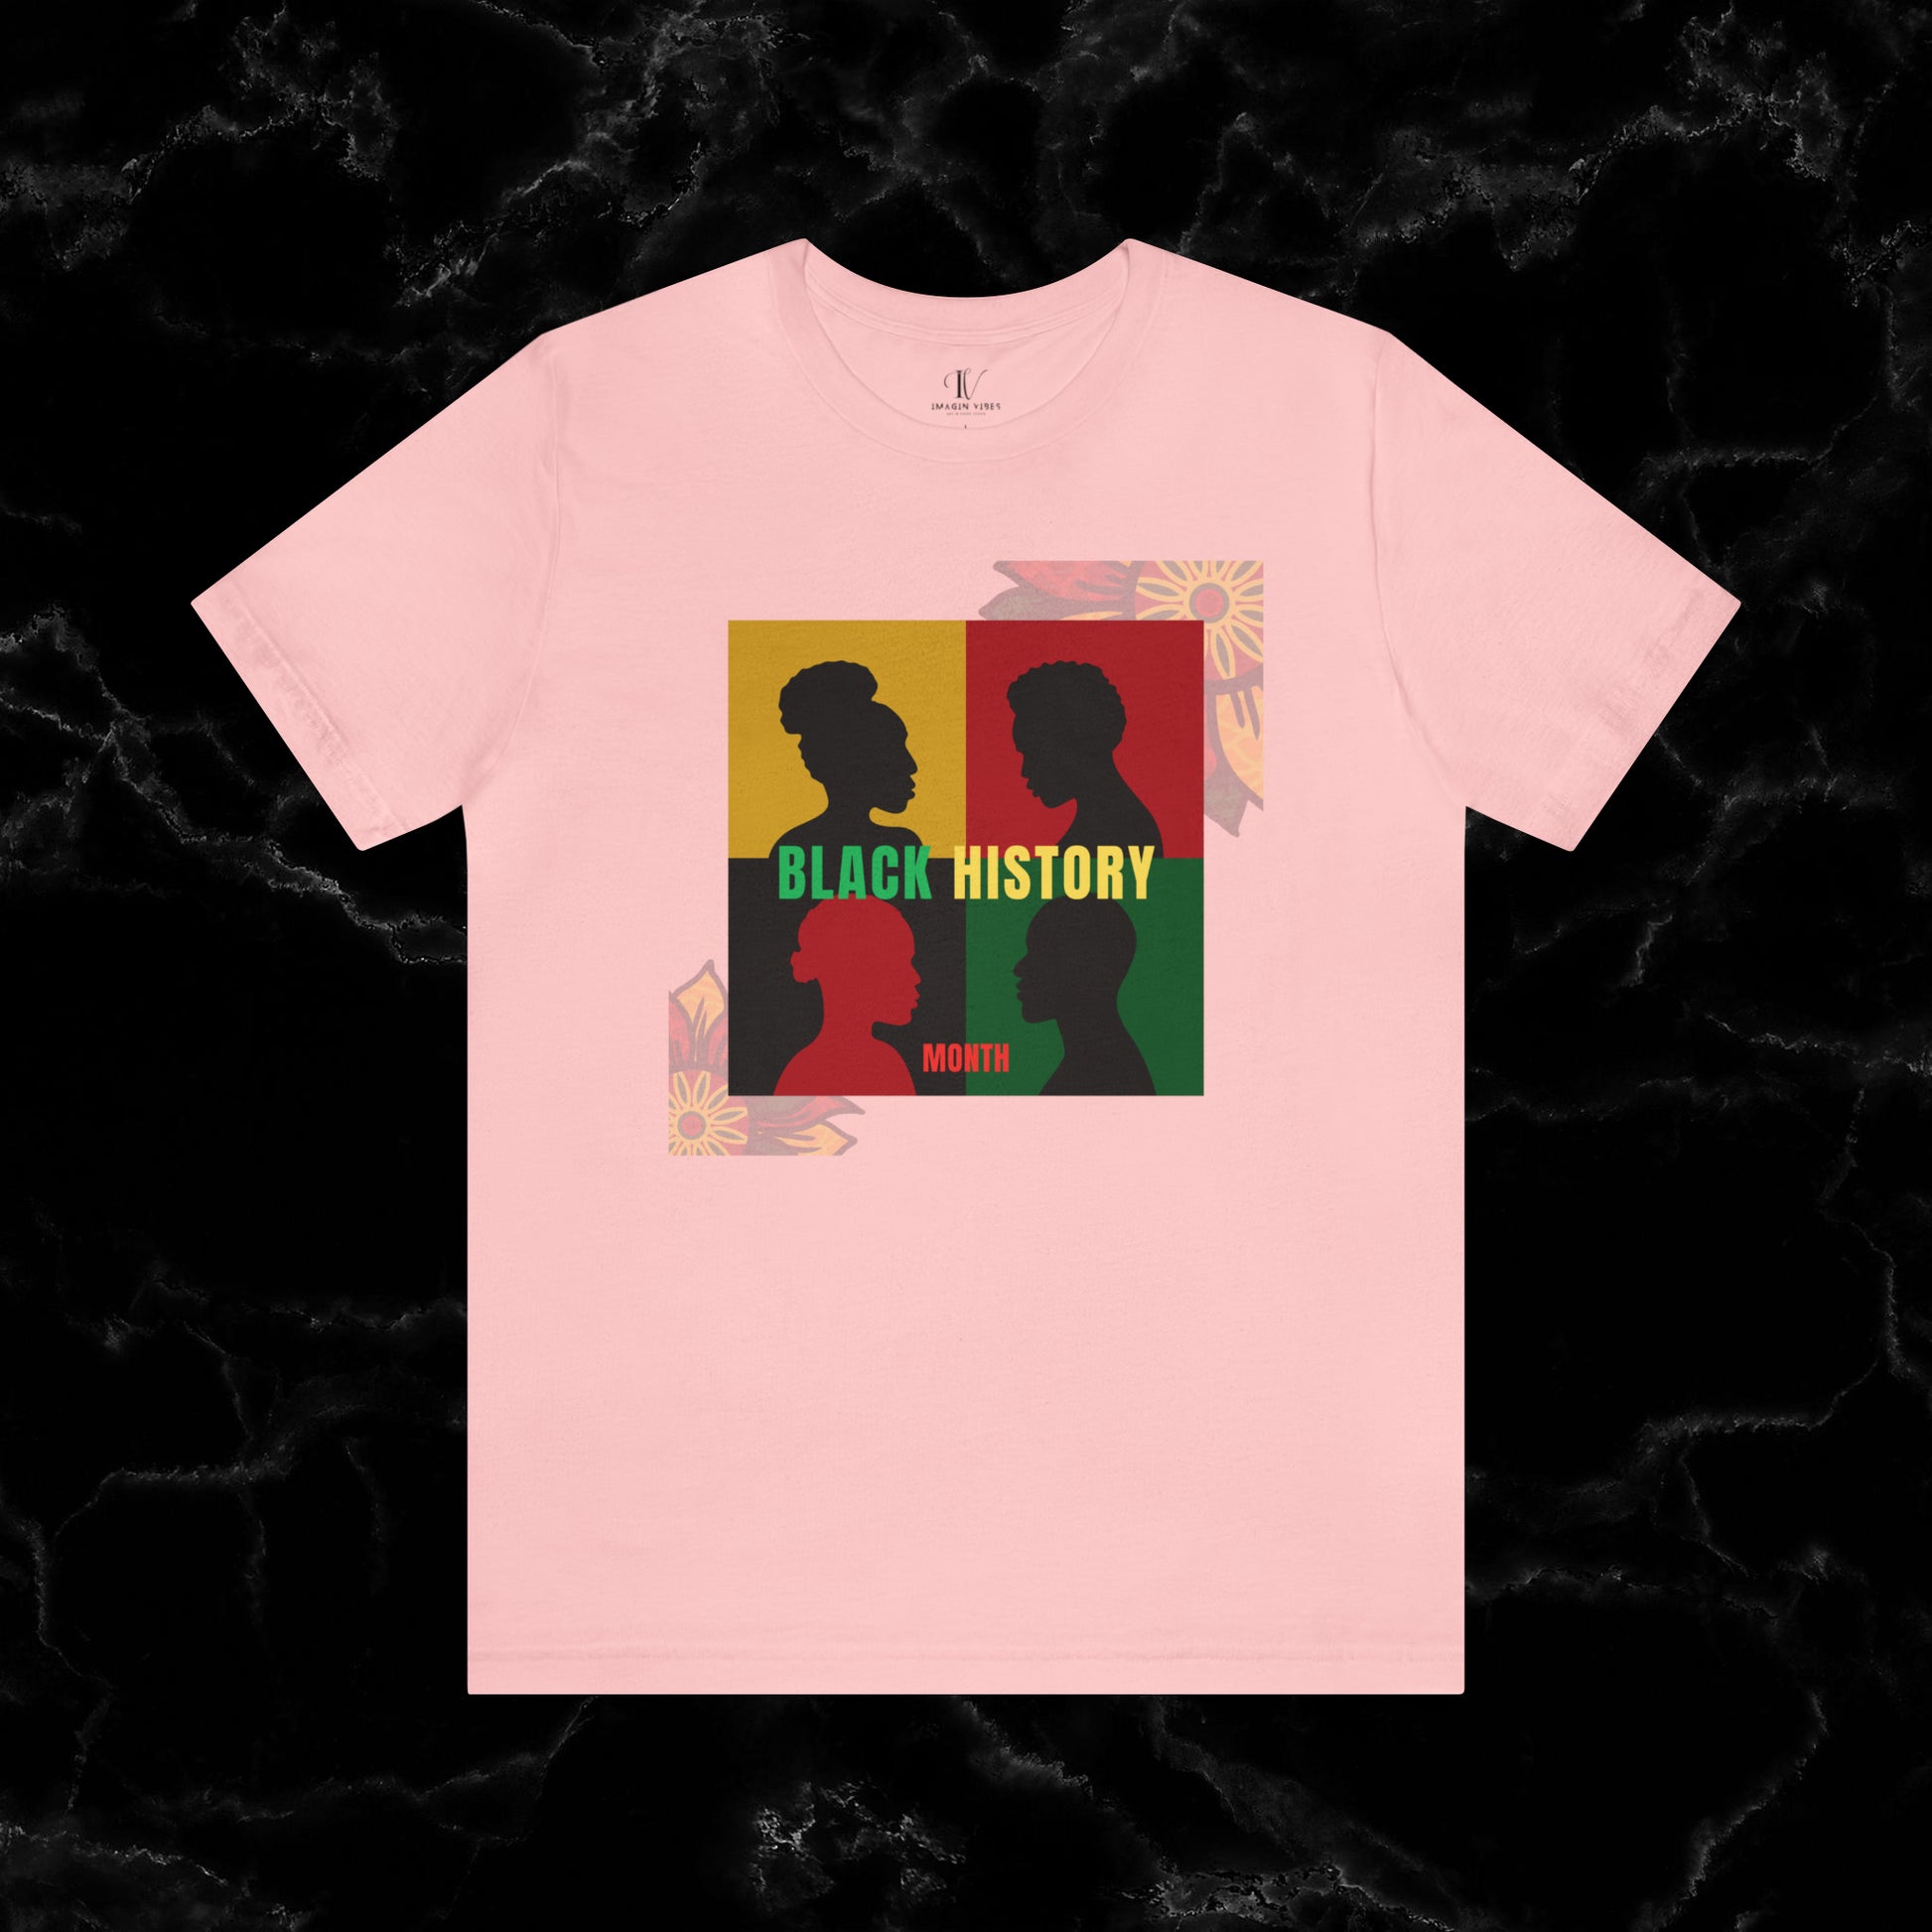 Trendy Black History Month Shirts Celebrating African American Pride and Heritage T-Shirt Pink XS 